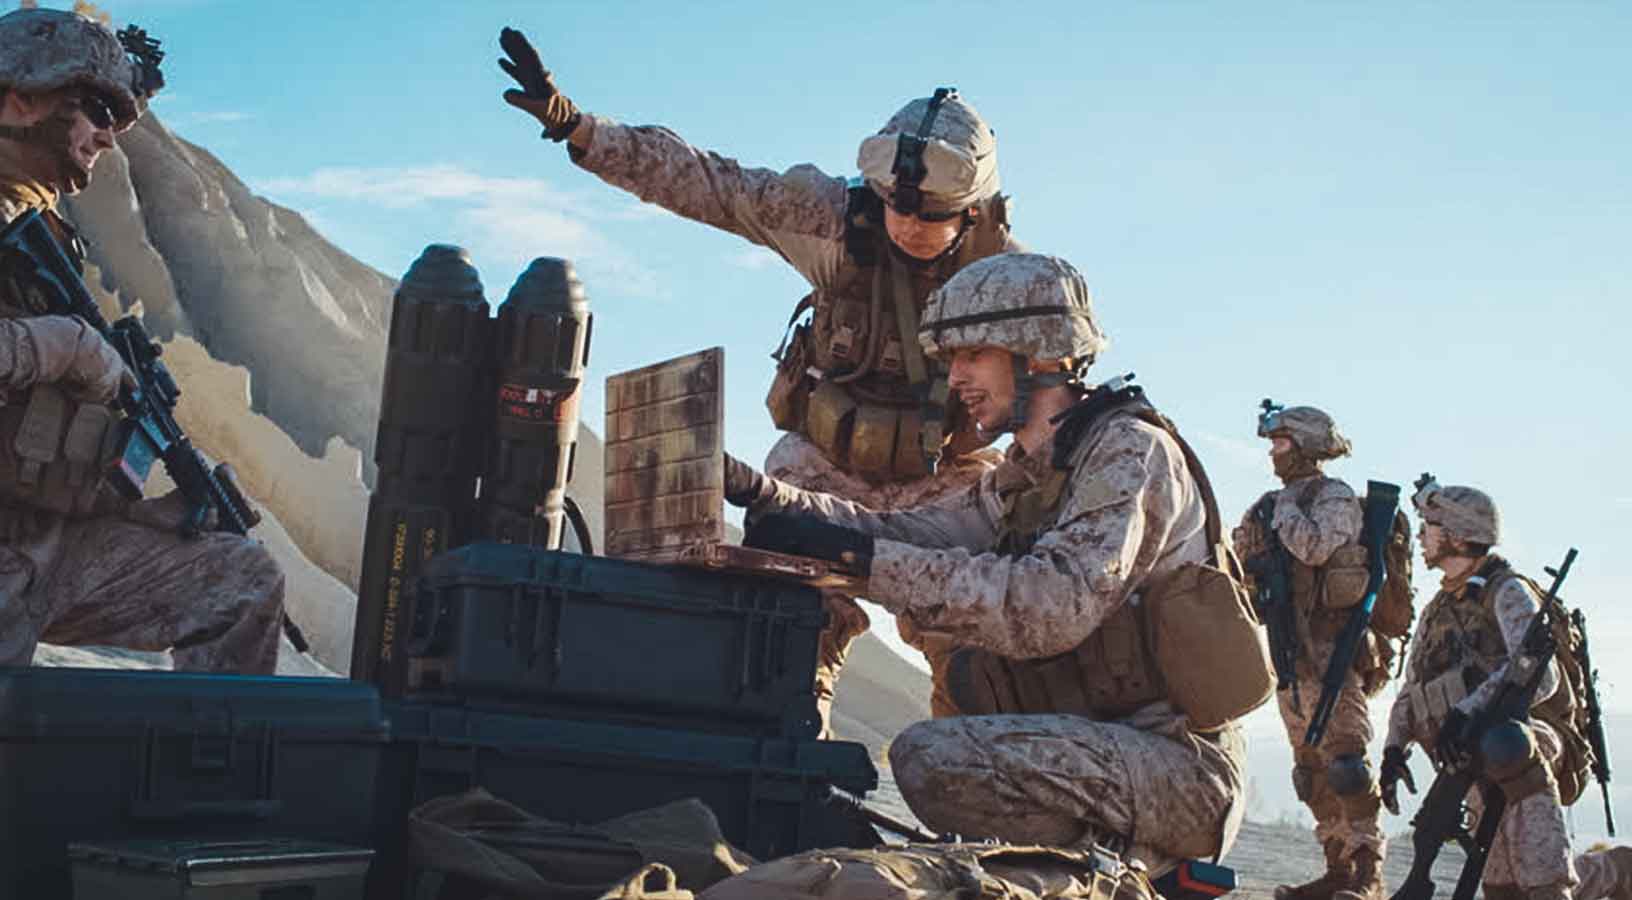 Five soldiers - two are using a laptop computer for surveillance during a military operation in the desert.